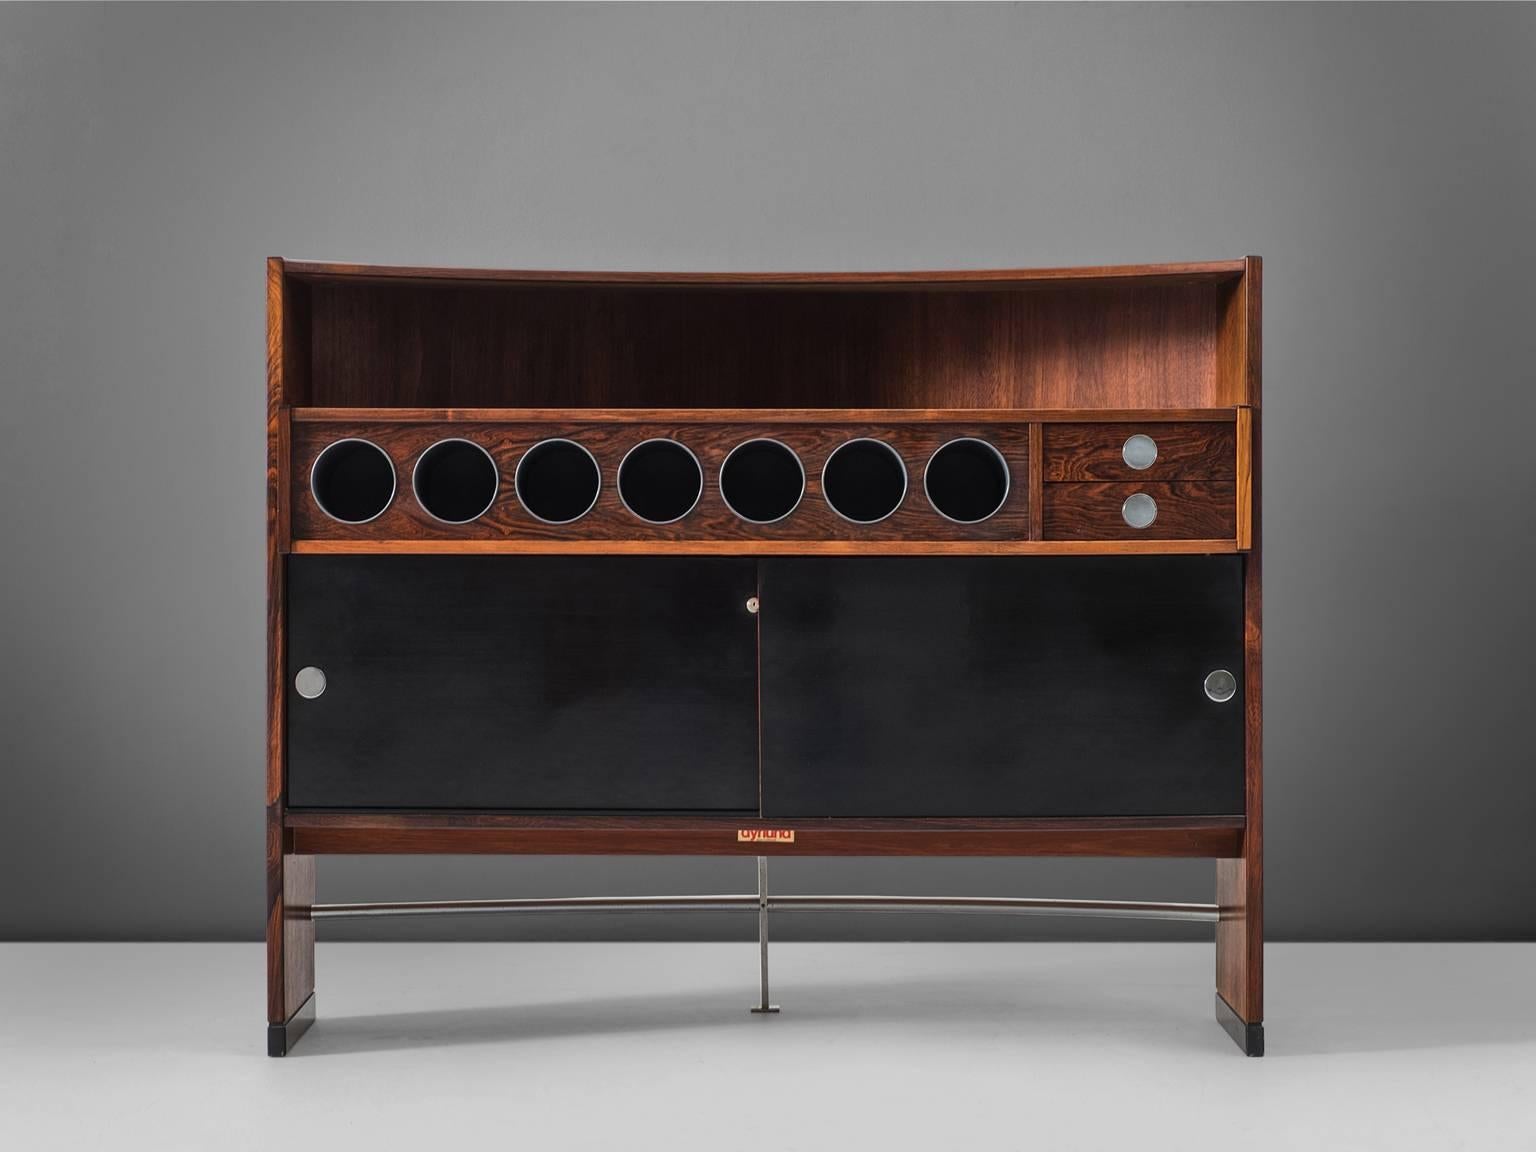 Dry bar, rosewood, chrome, Denmark, circa 1960.

Designed in the 1960s and covered with rosewood veneer. Doors are made from black laminated panels as well as both top decks. Finished with some chrome details which provides a luxury feeling.